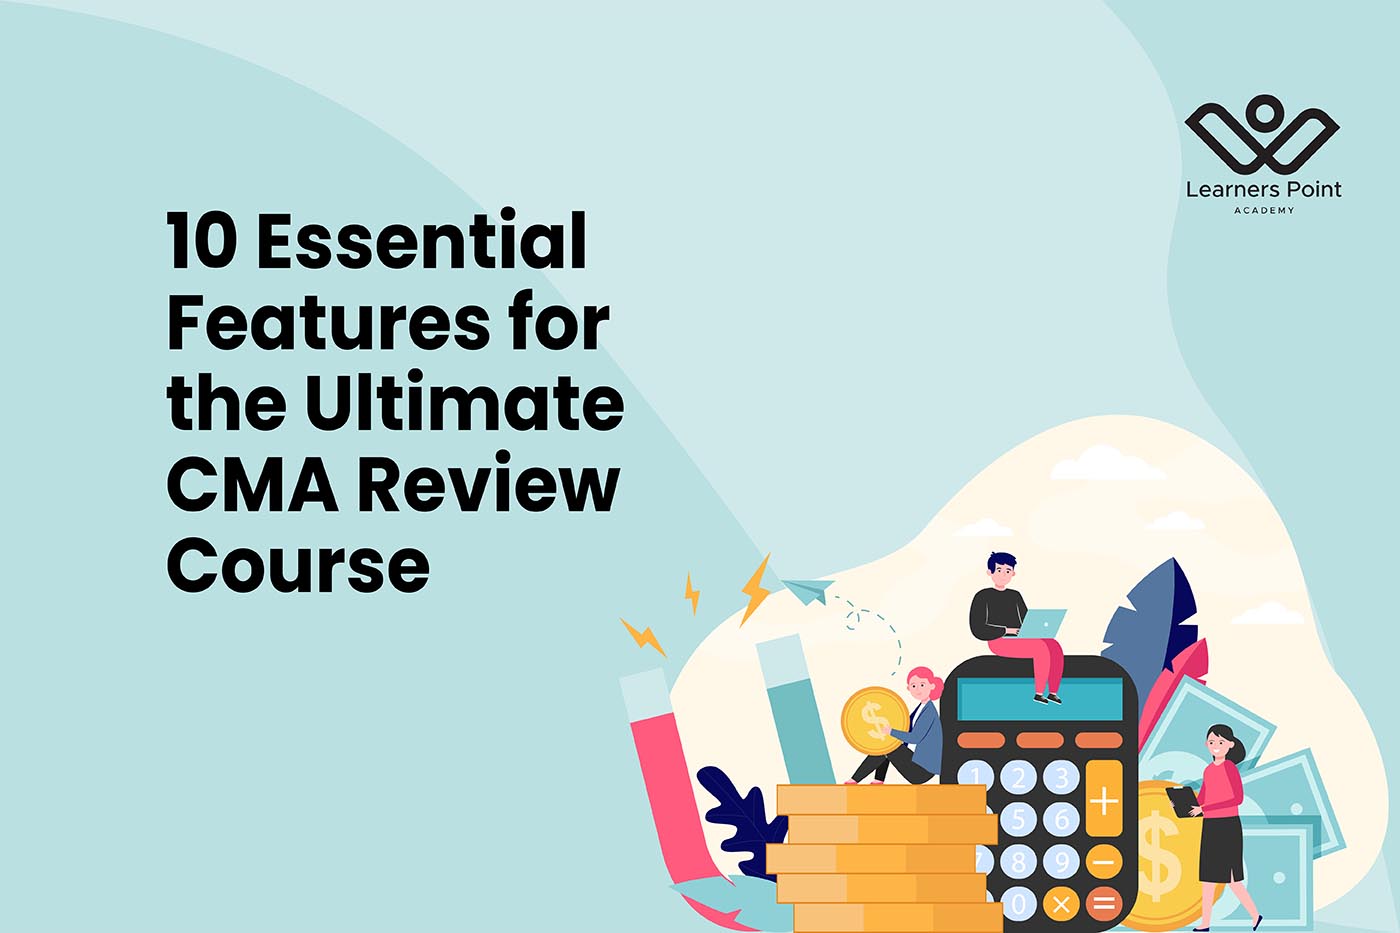 10 Essential Features for the Ultimate CMA Review Course